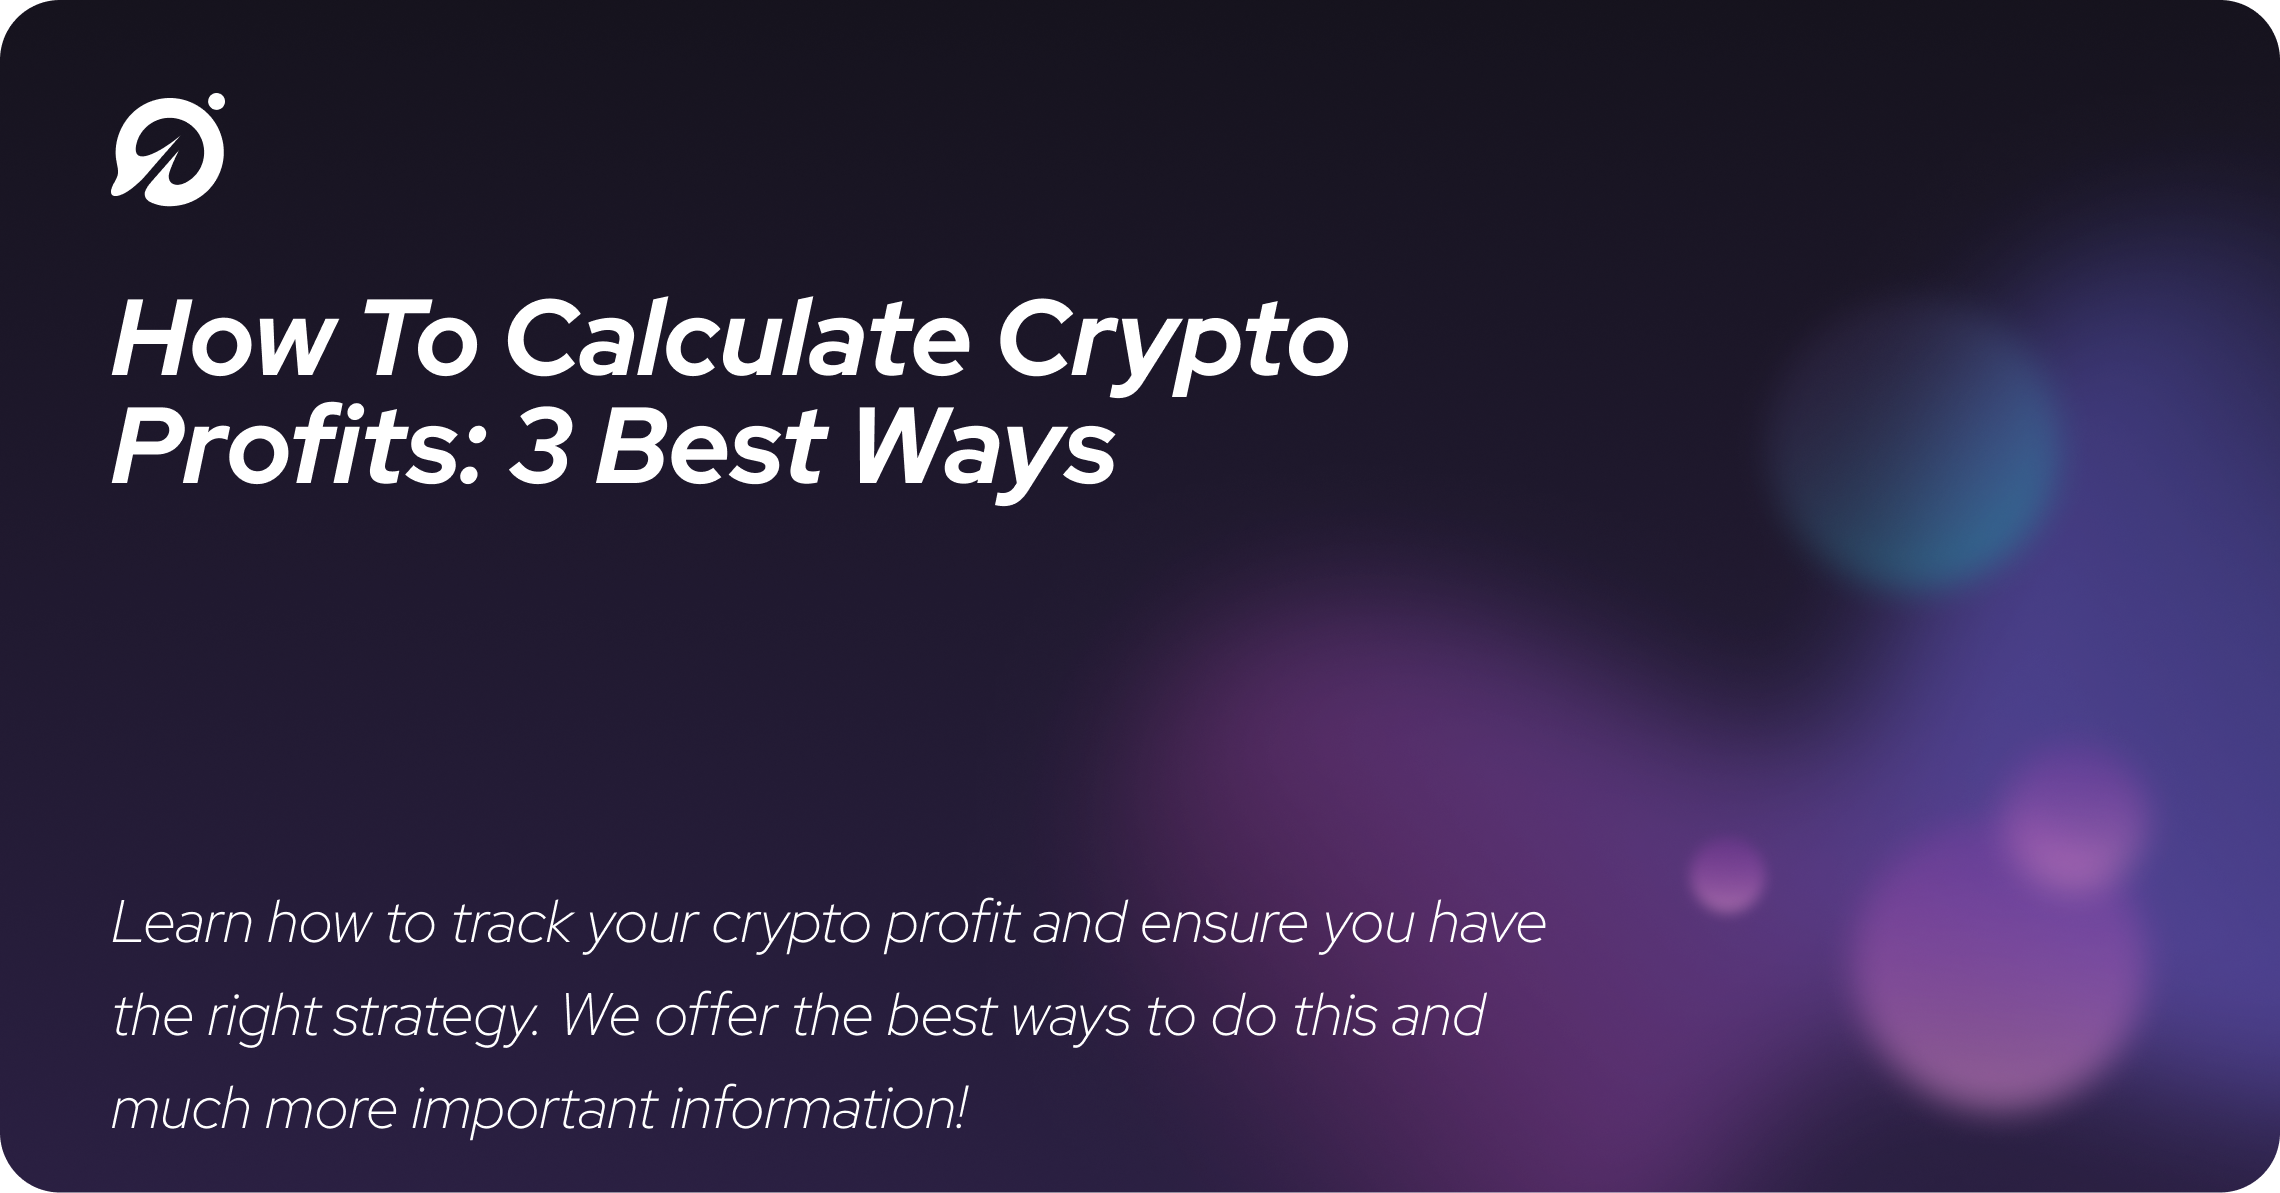 How To Calculate Crypto Profits: 3 Best Ways